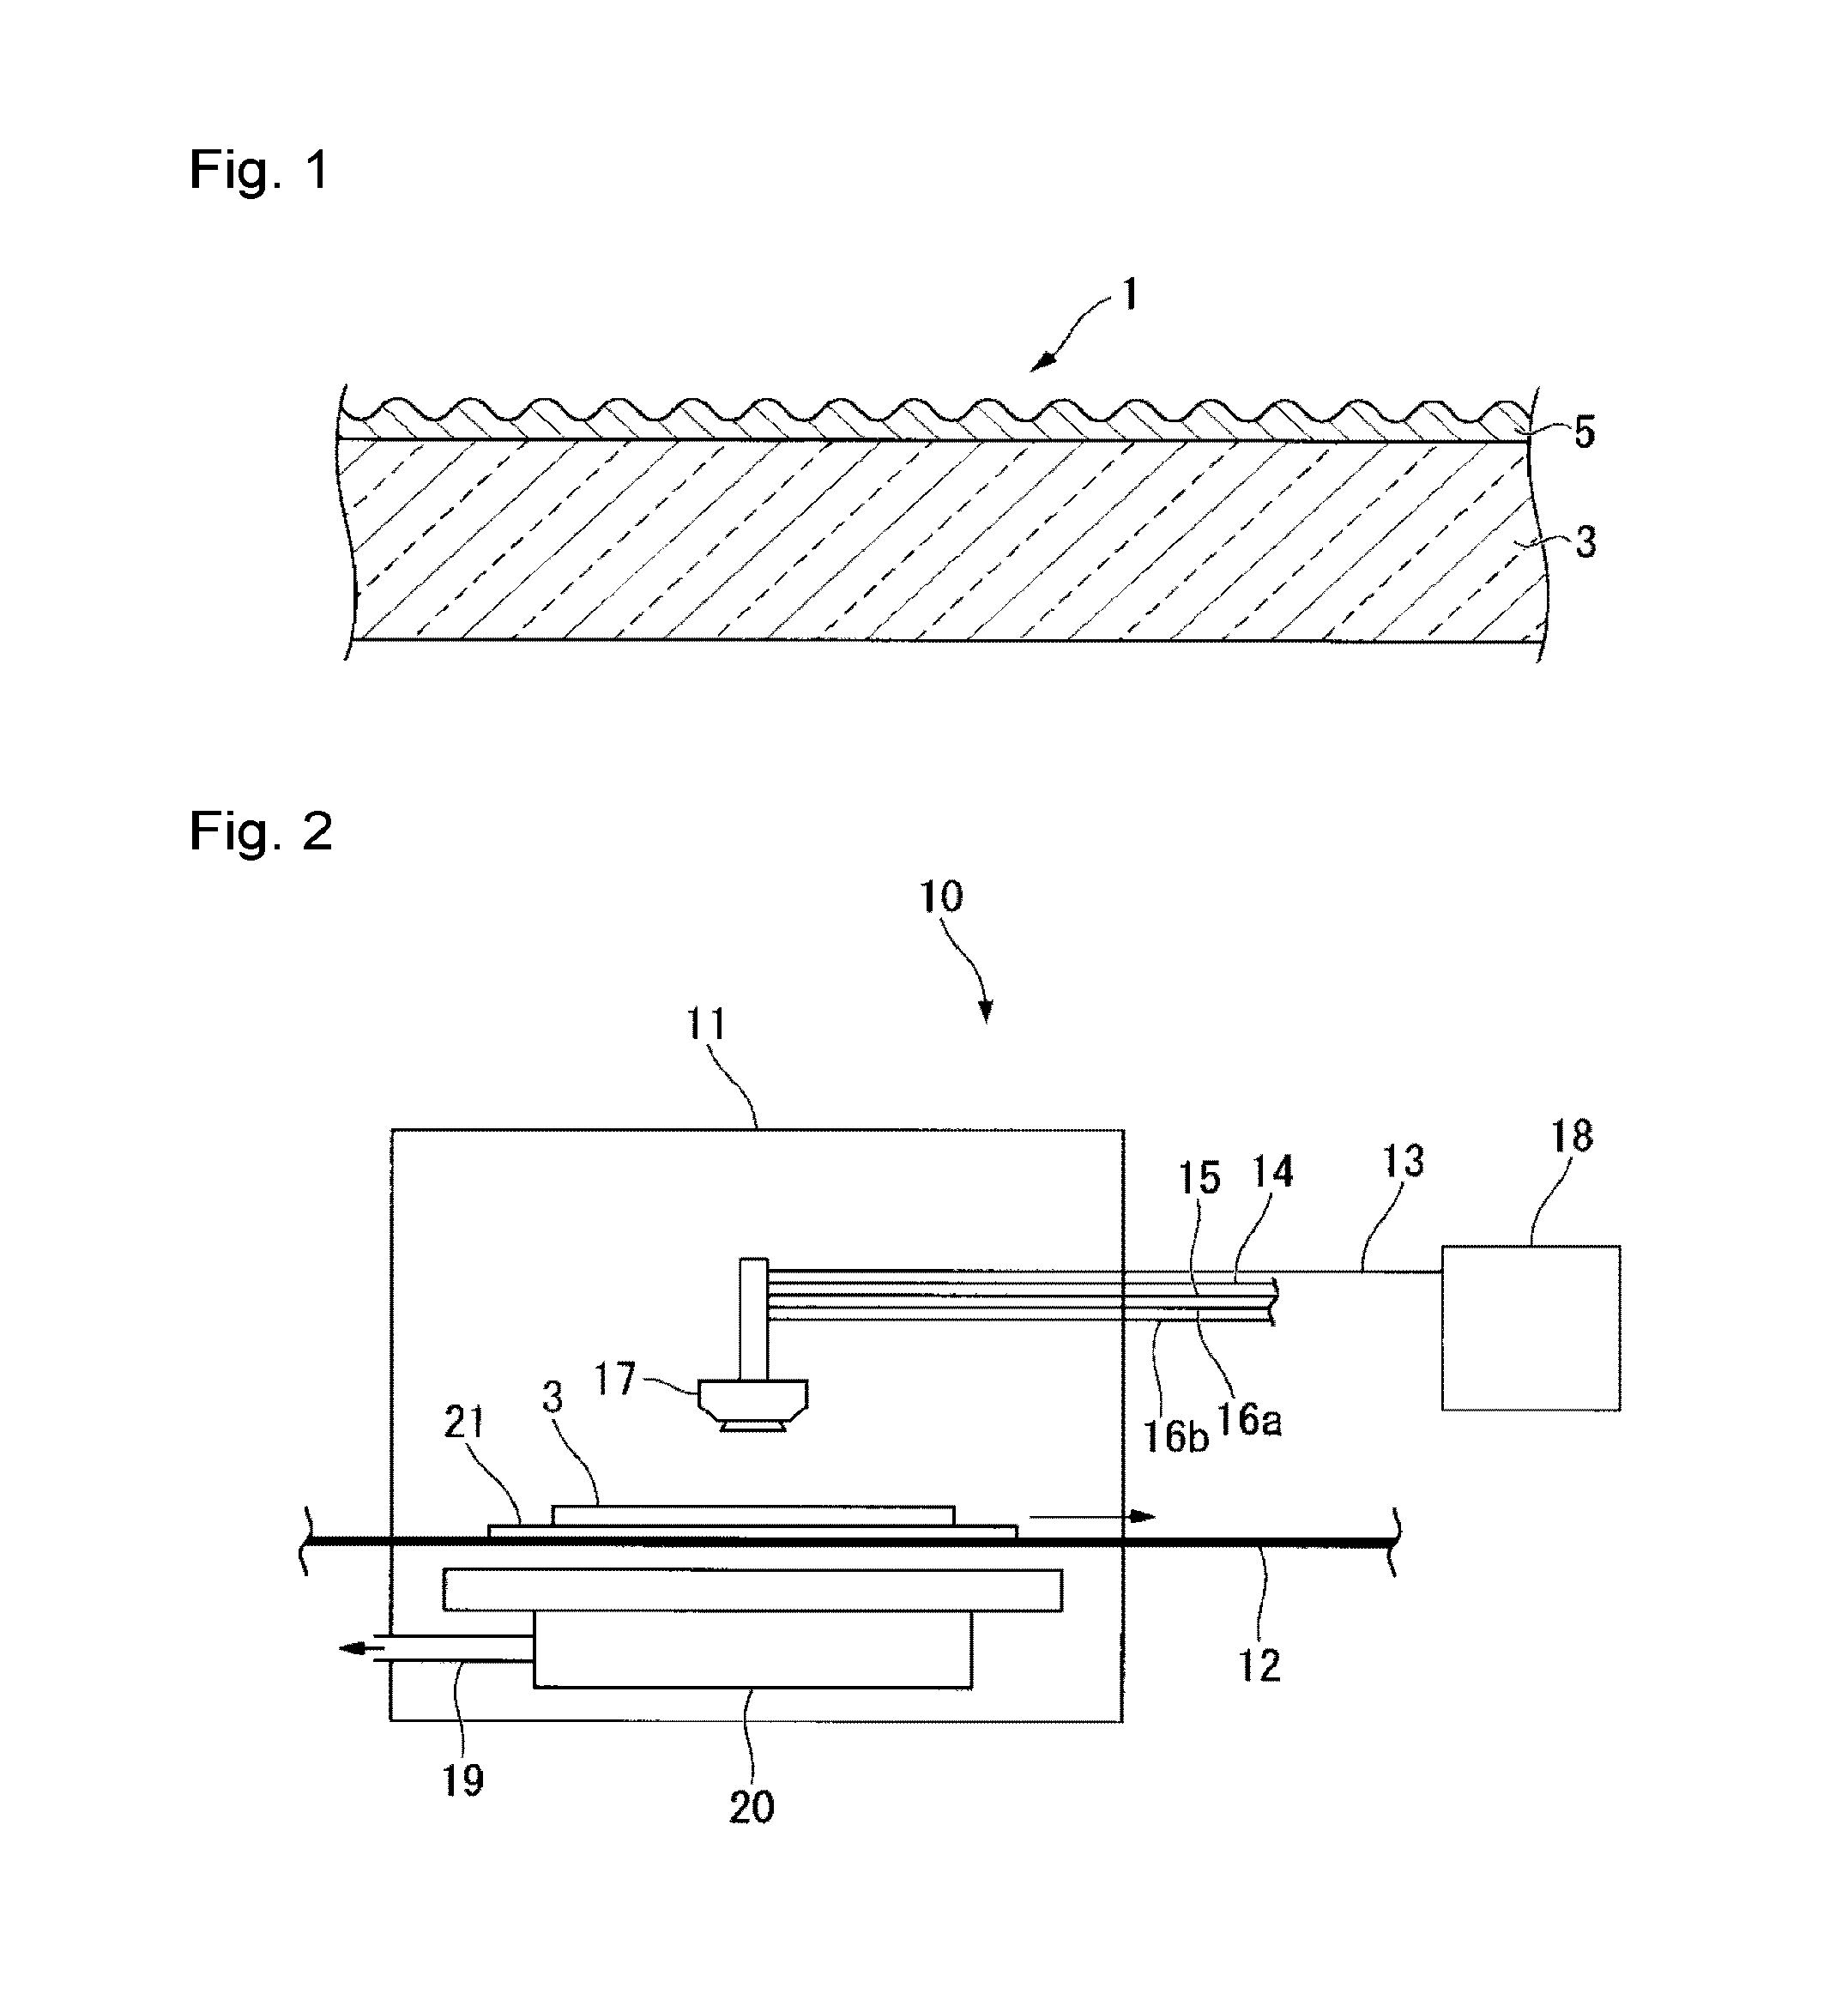 Antiglare film-coated substrate, method for its production, and article